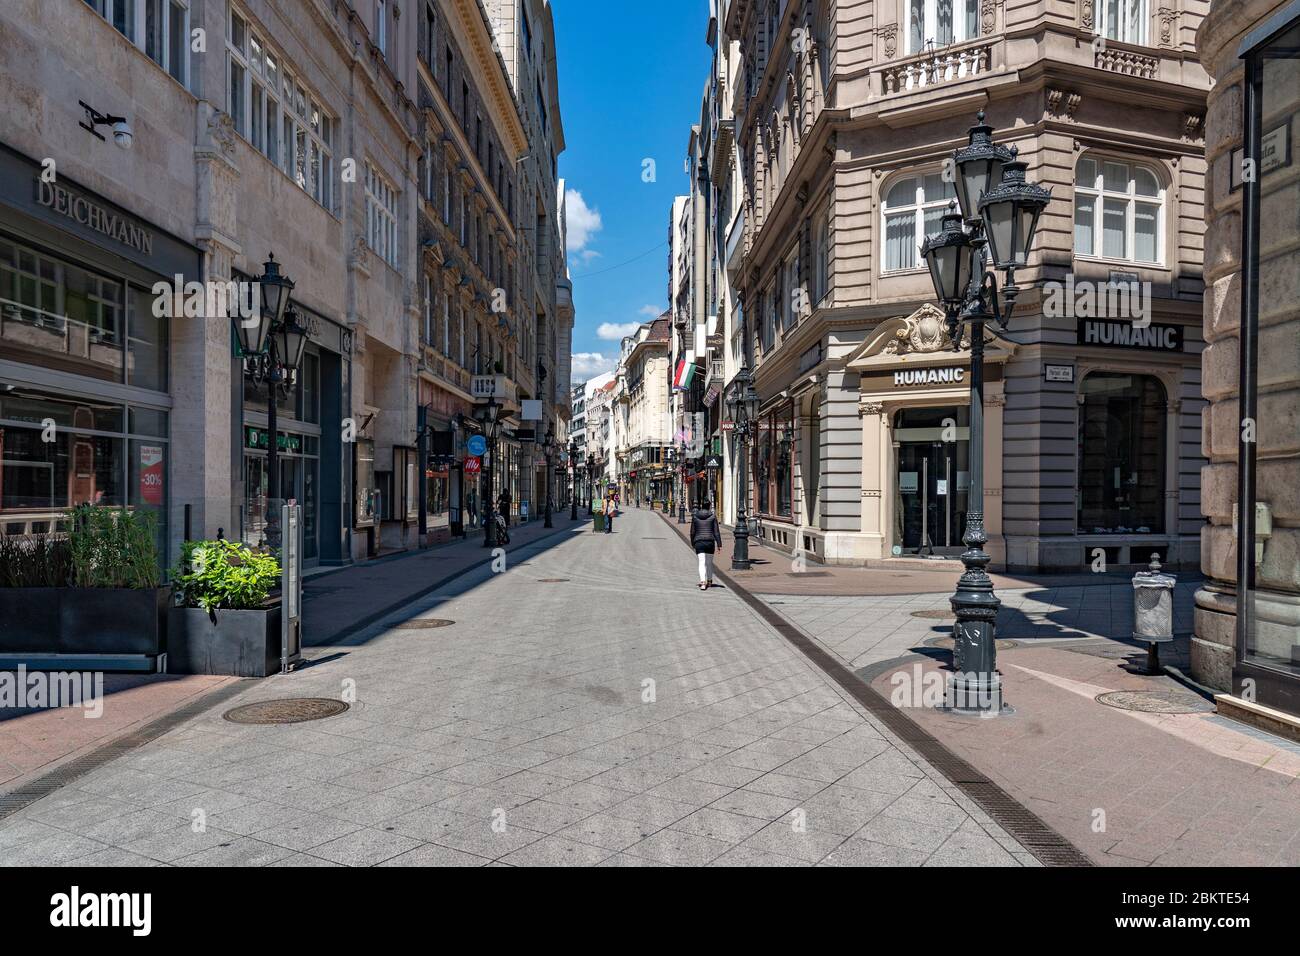 The Vaci street, main pedestrian area of the city in spring time. Stock Photo